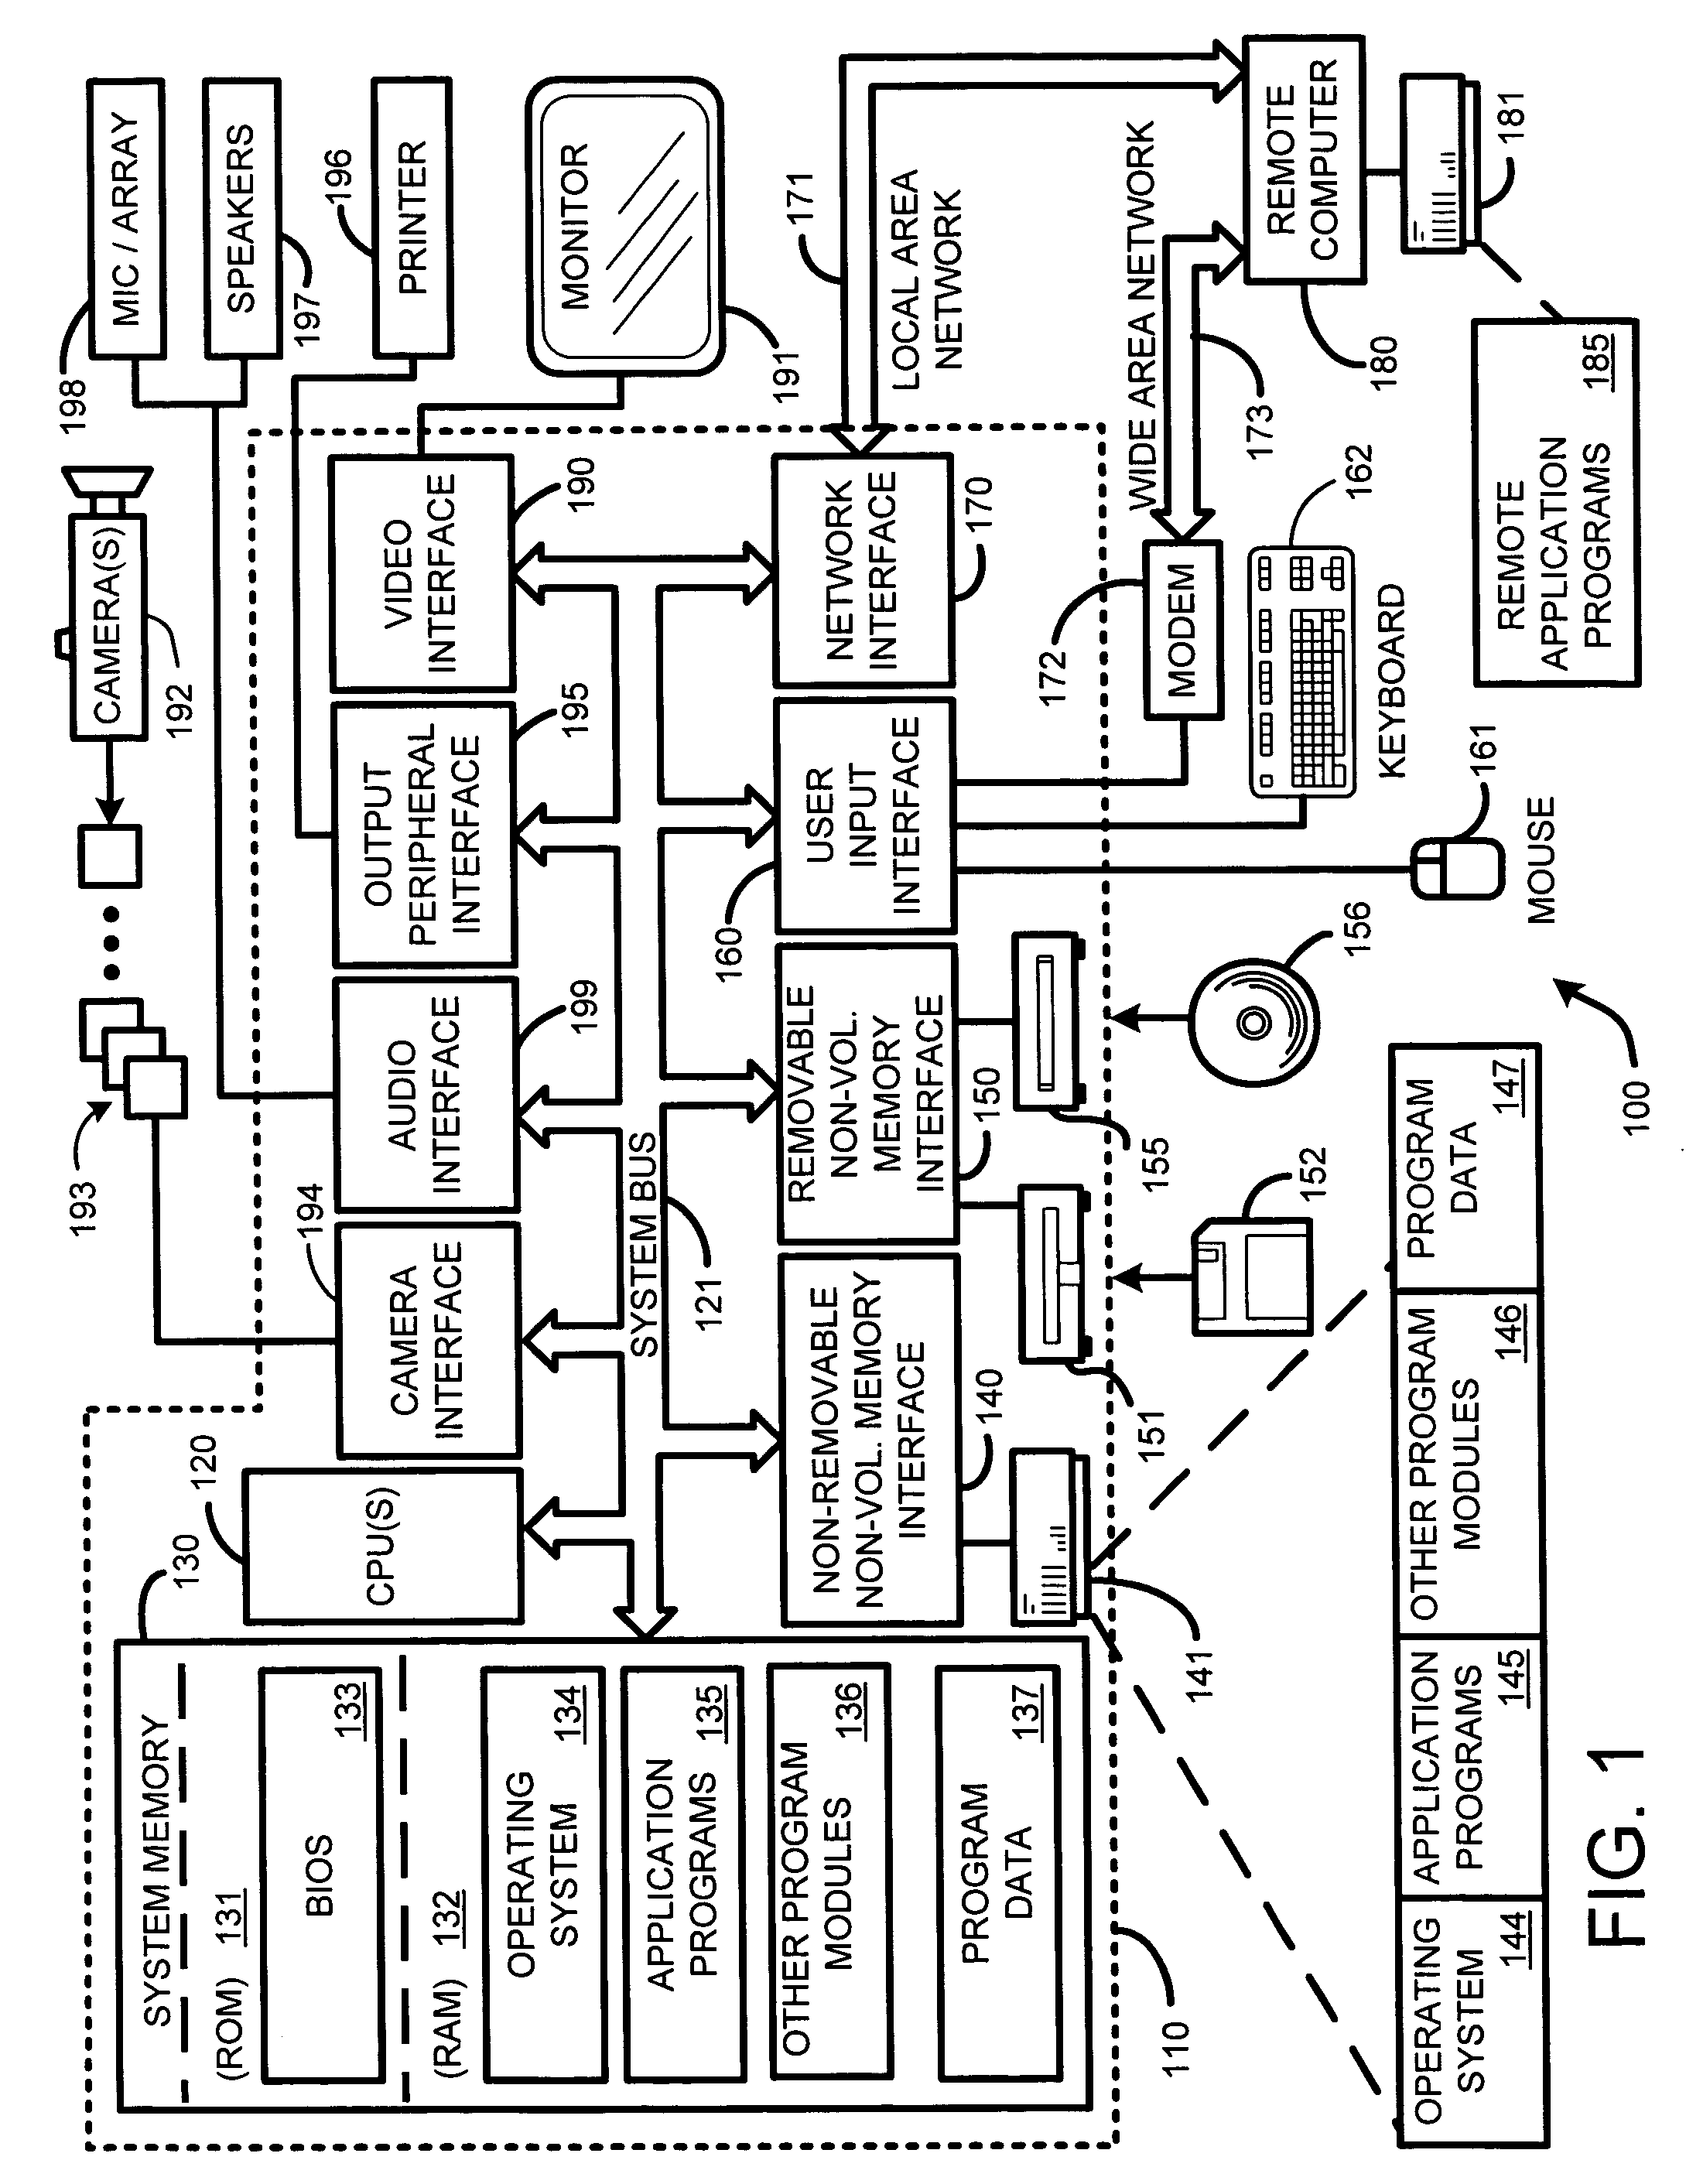 System and method for automatic video editing using object recognition